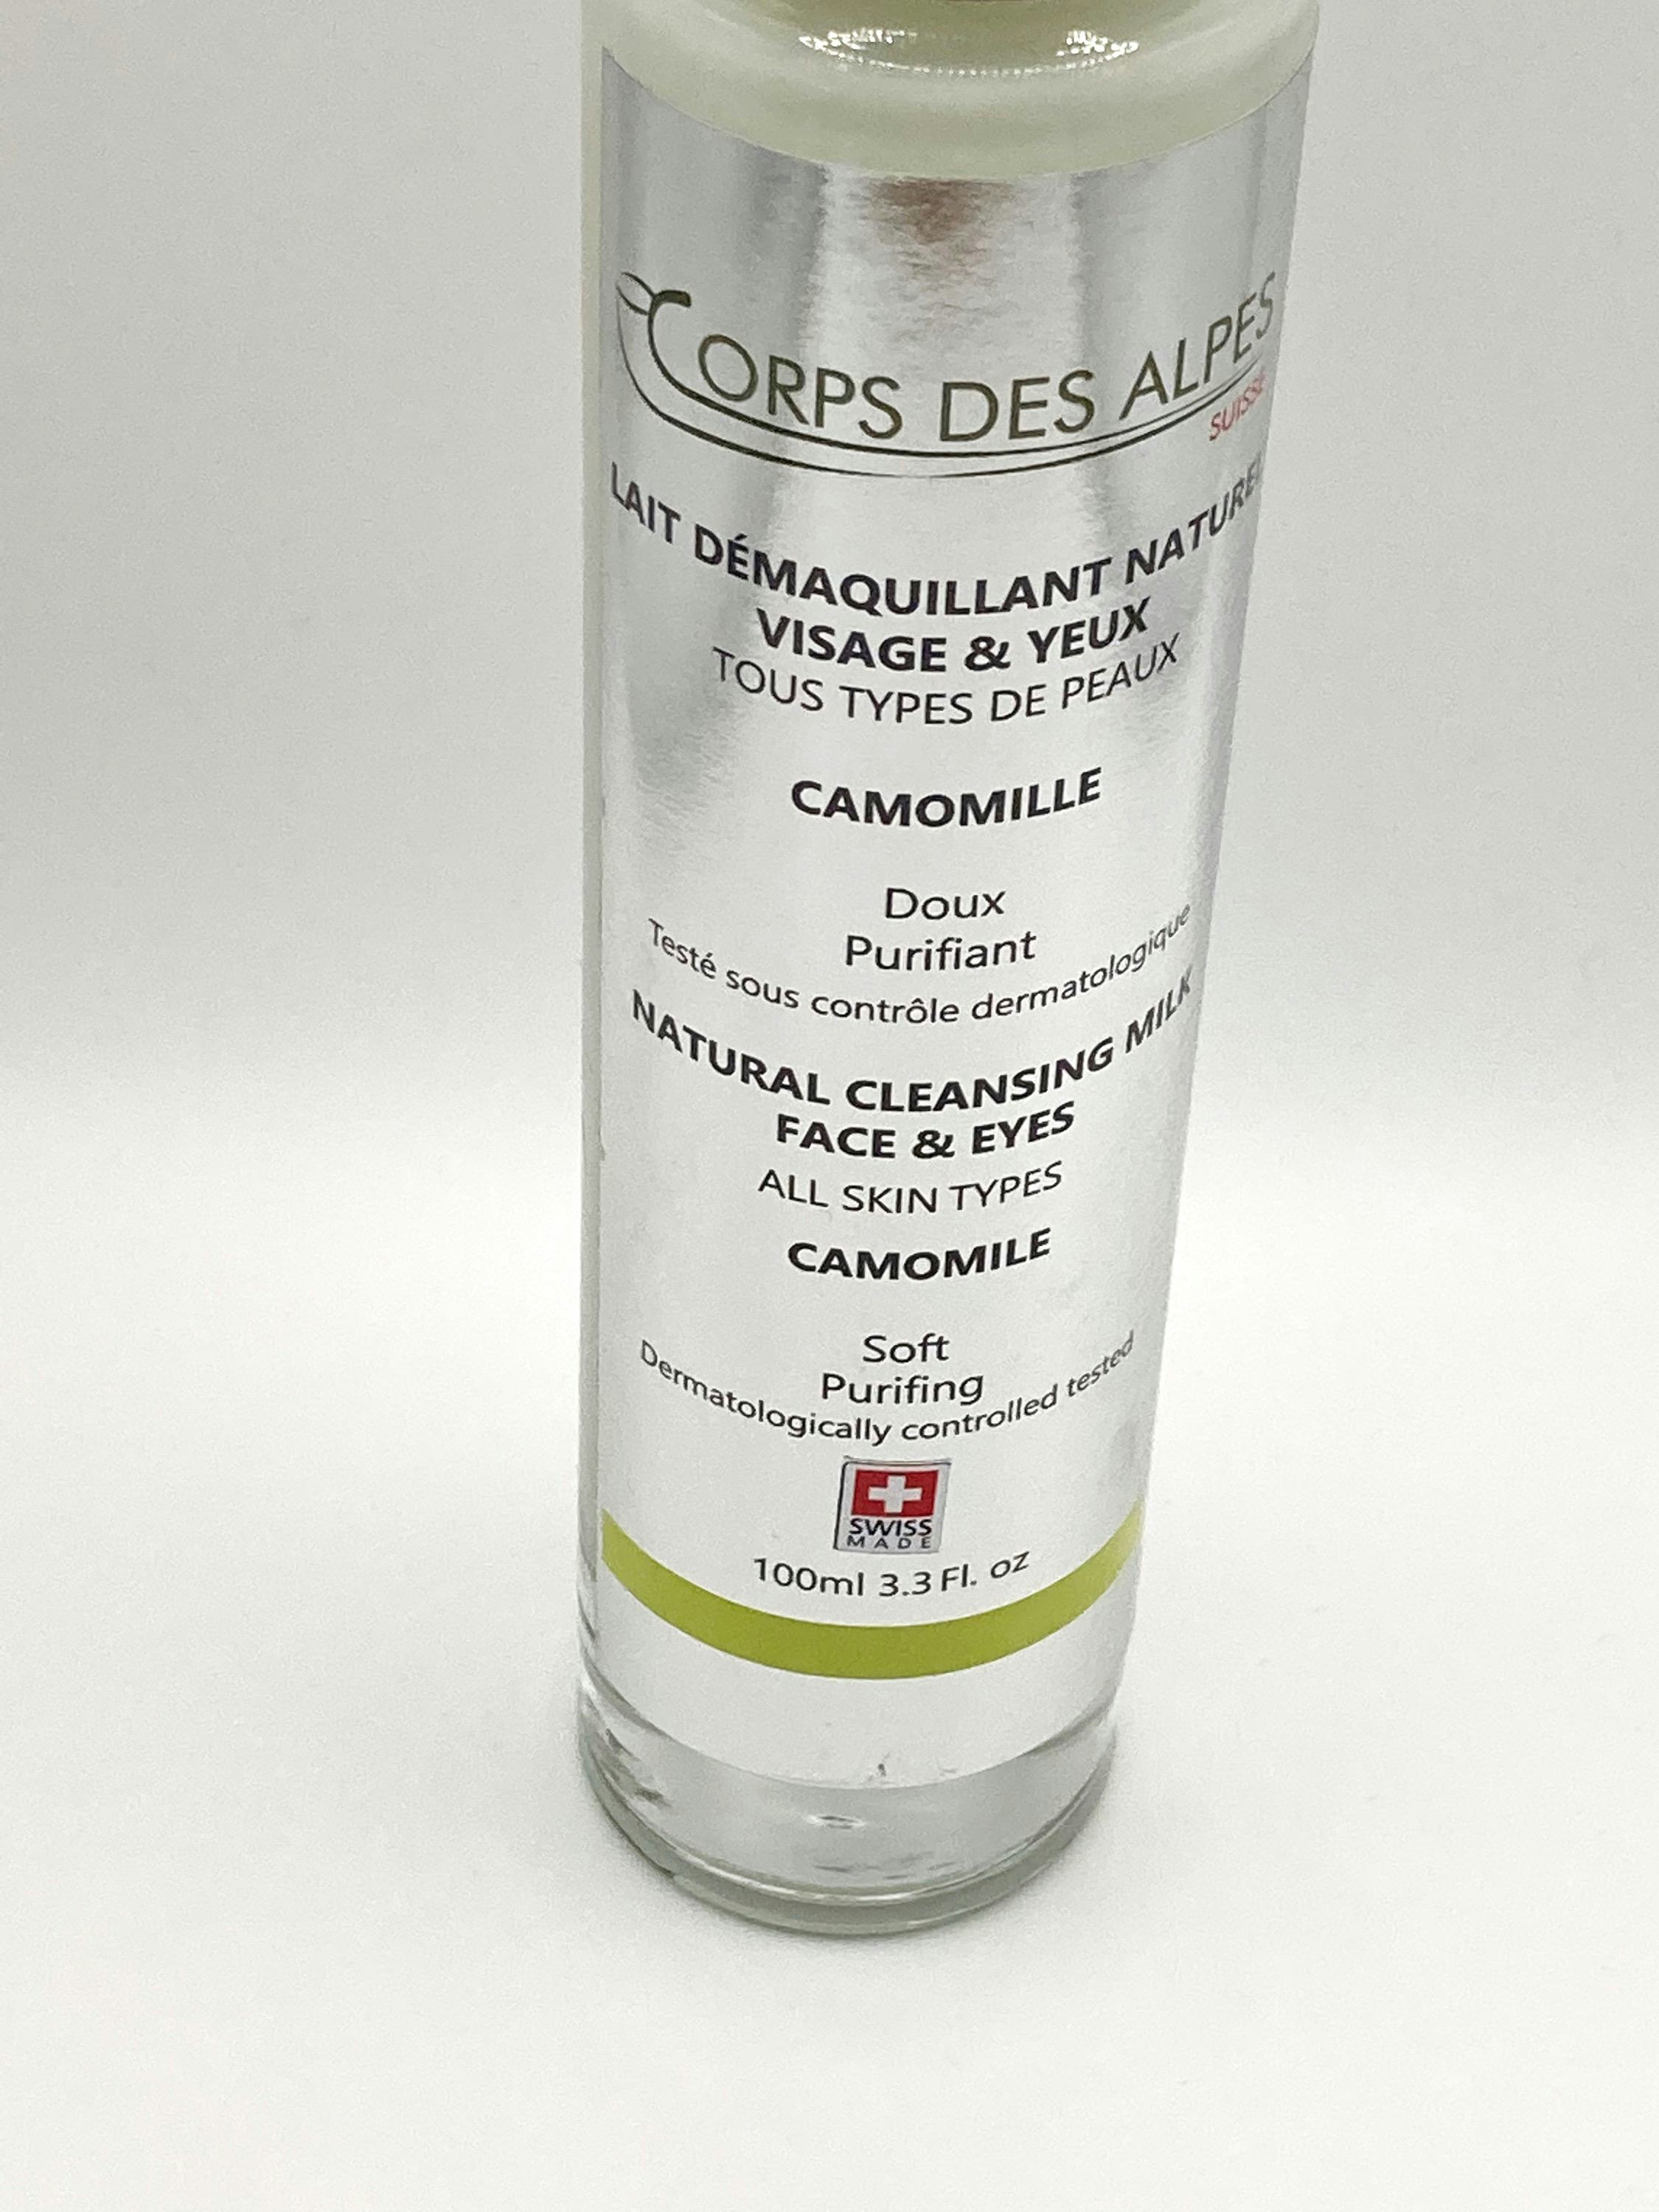 Lait Démaquillant Naturel Camomille, artisanal product for direct sale in Switzerland